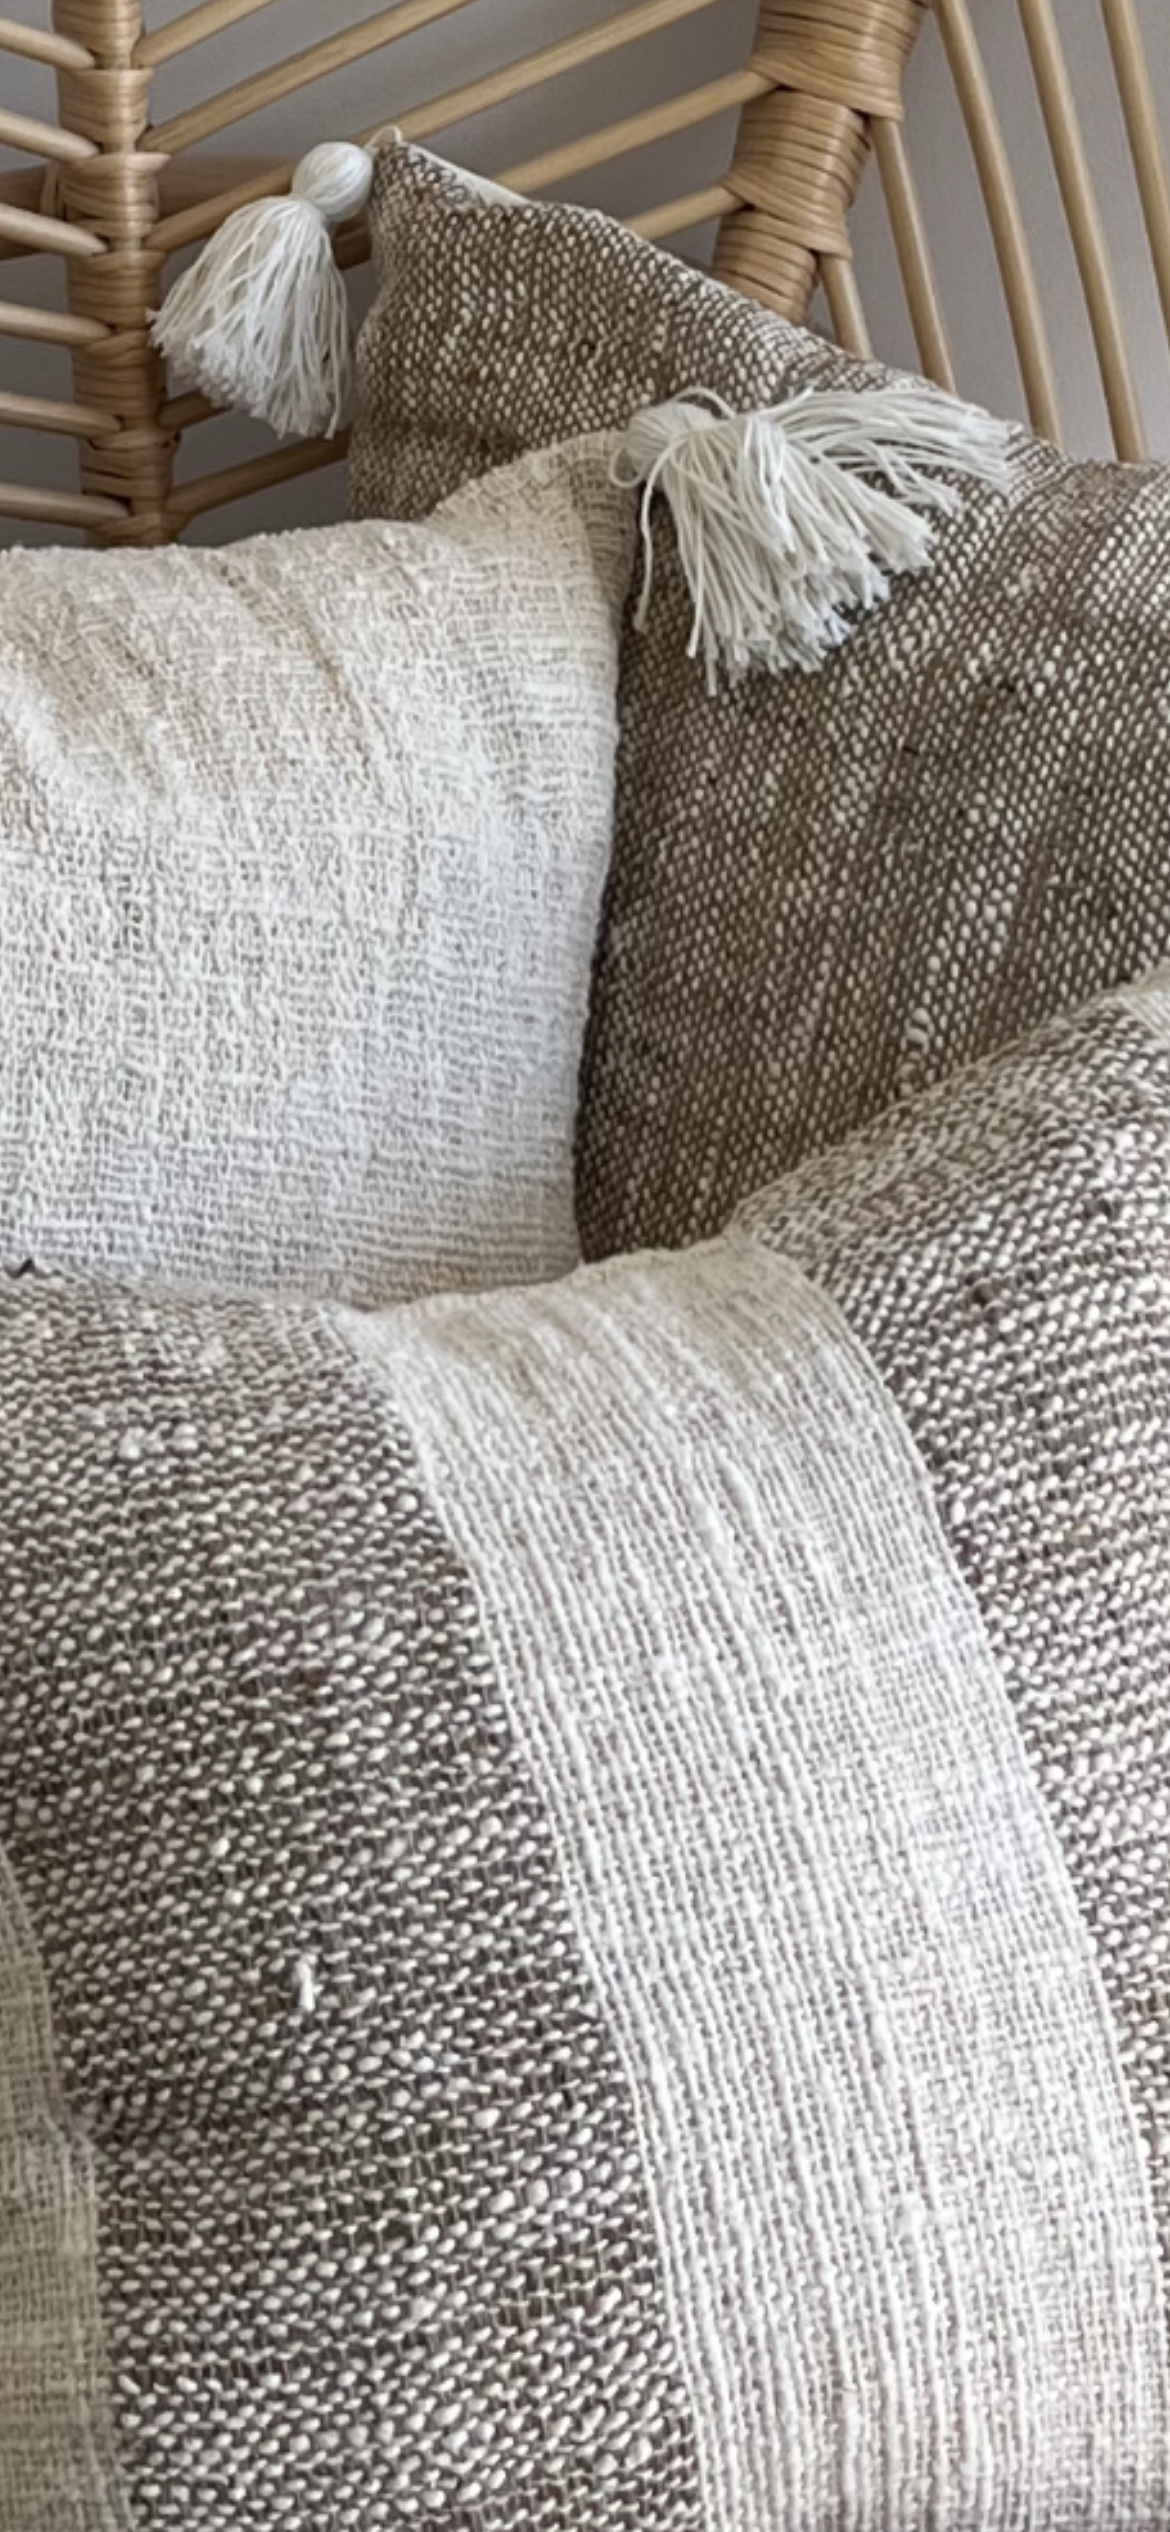 Heather Natural/Brown Cushion Cover / Available 2 sizes